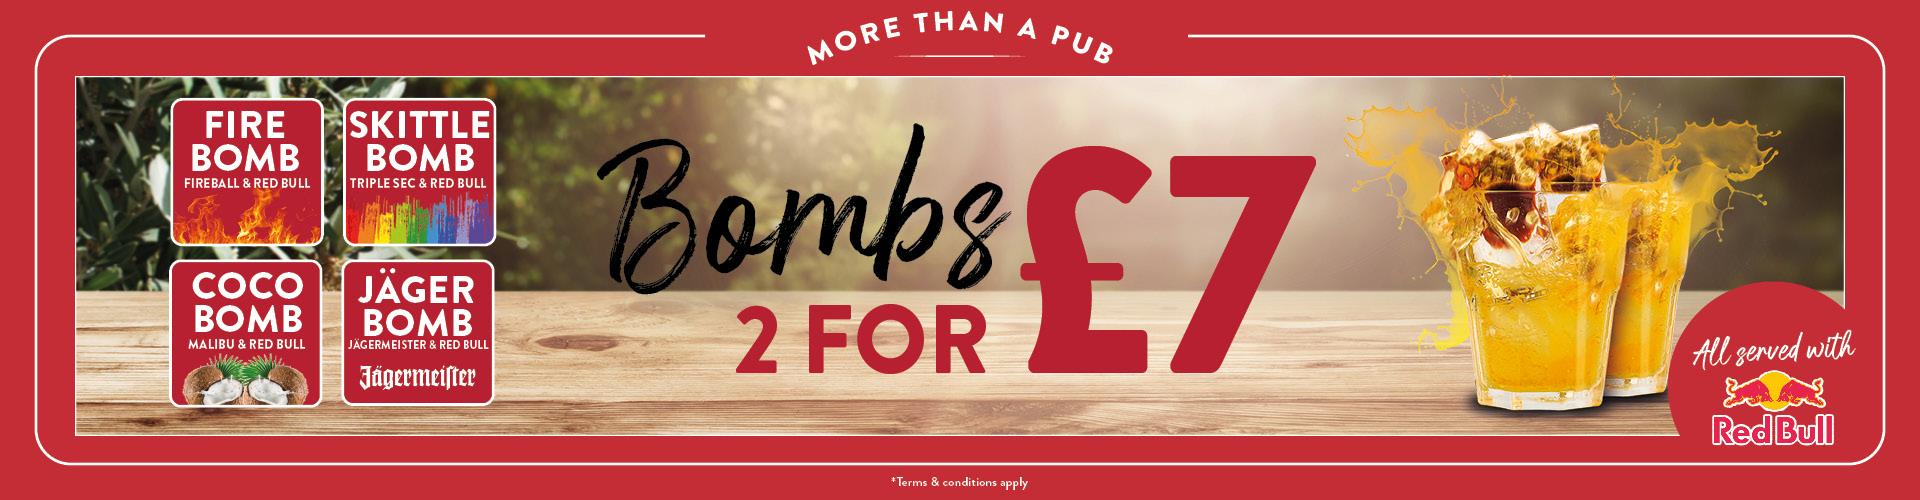 Bomb bundle drink offers at your local Craft Union Pub